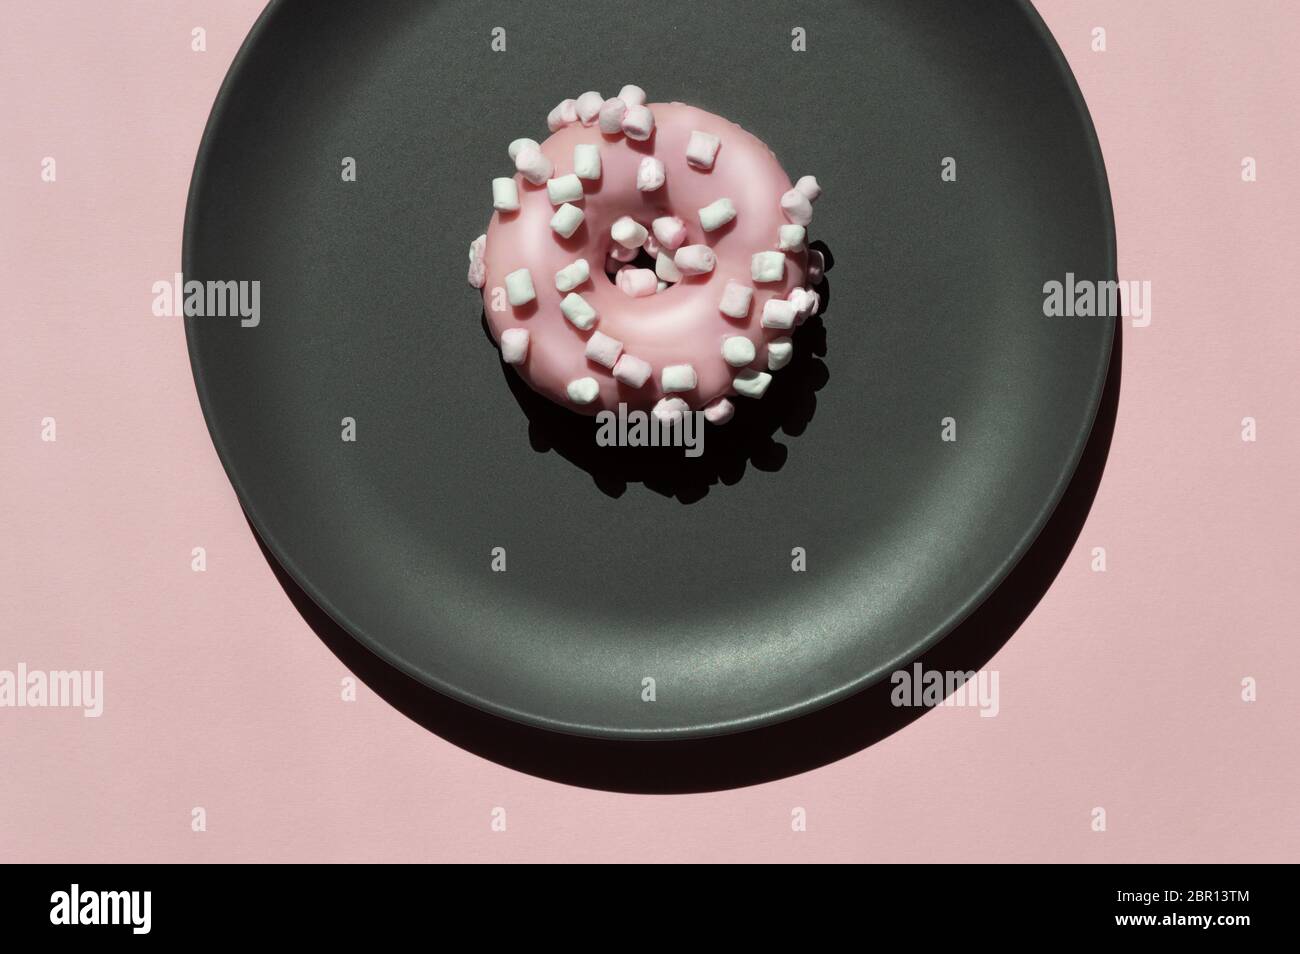 One pink donat with white marshmallows on the dark grey ceramic plate on the light coral background. Geometric sunny creative trendy composition with Stock Photo